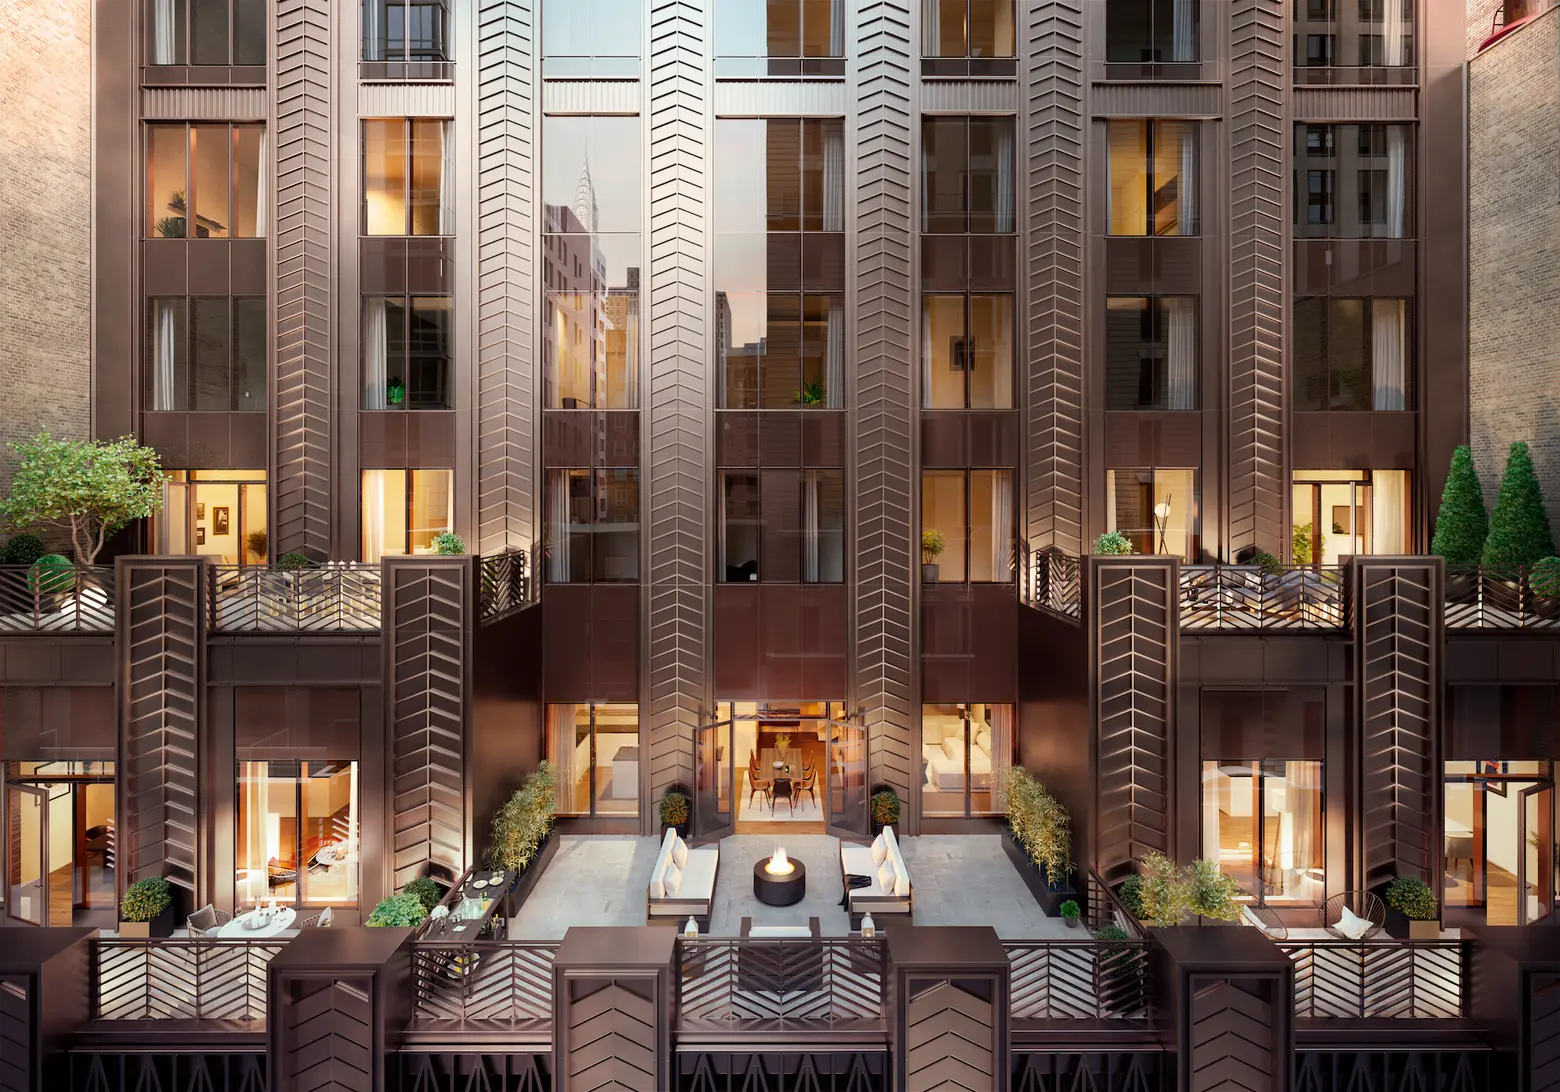 Rockefeller Center developer reveals new Art Deco views of its first residential tower in Nomad